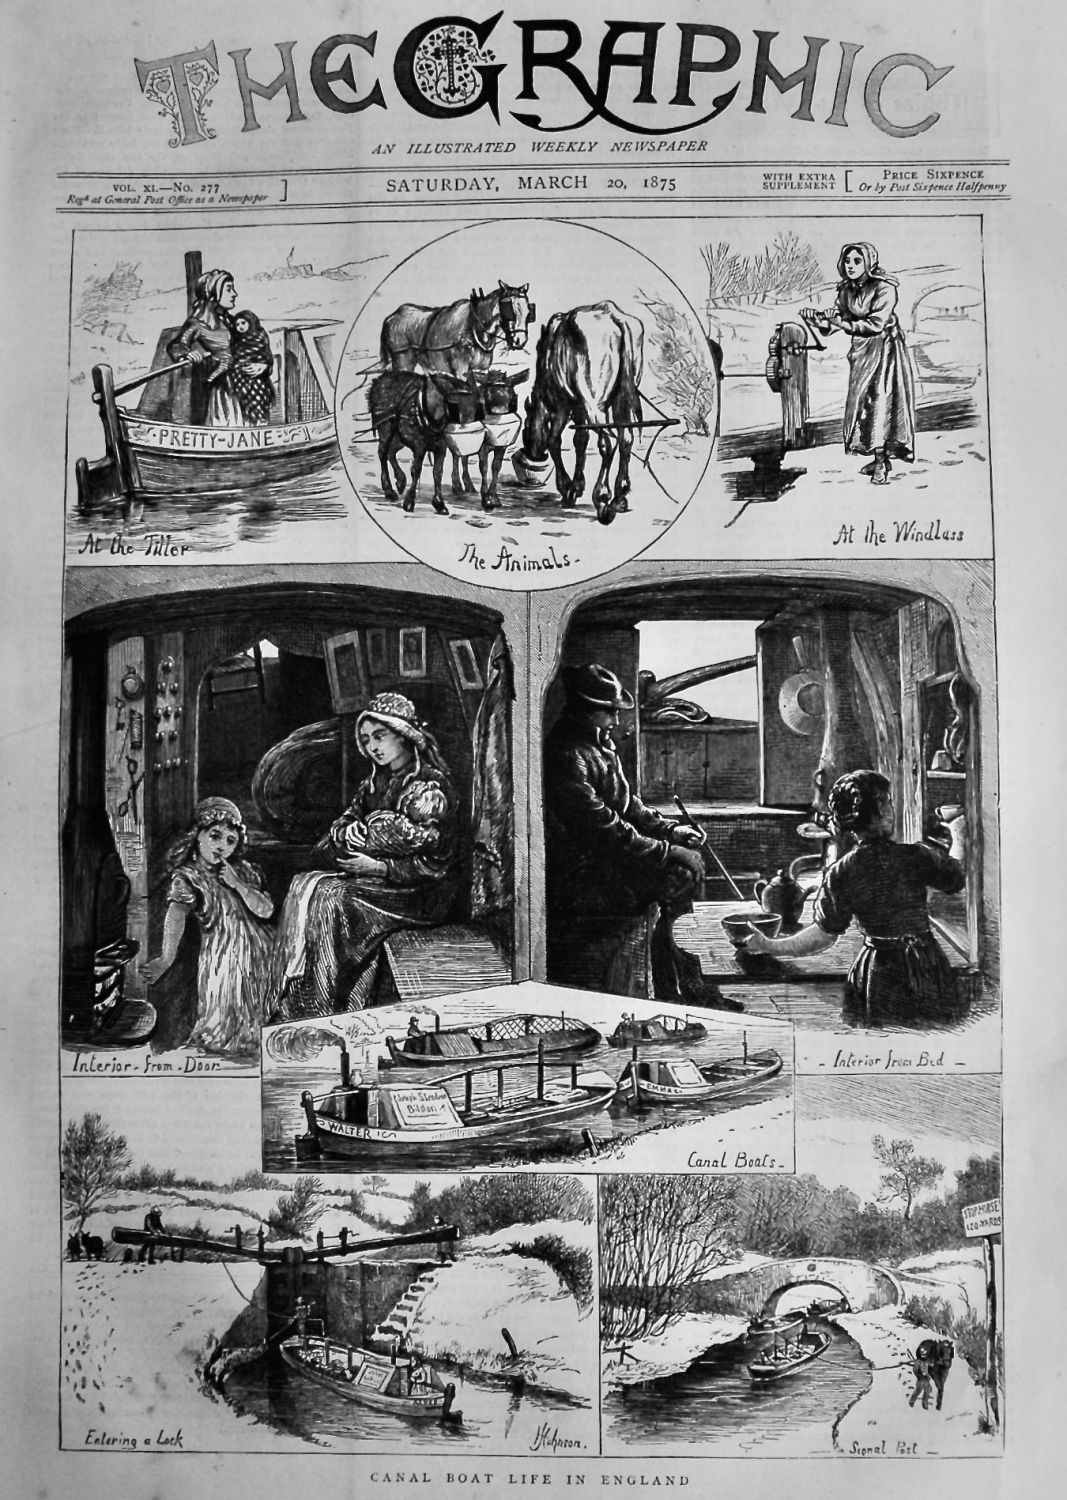 Canal Boat Life in England.  1875.